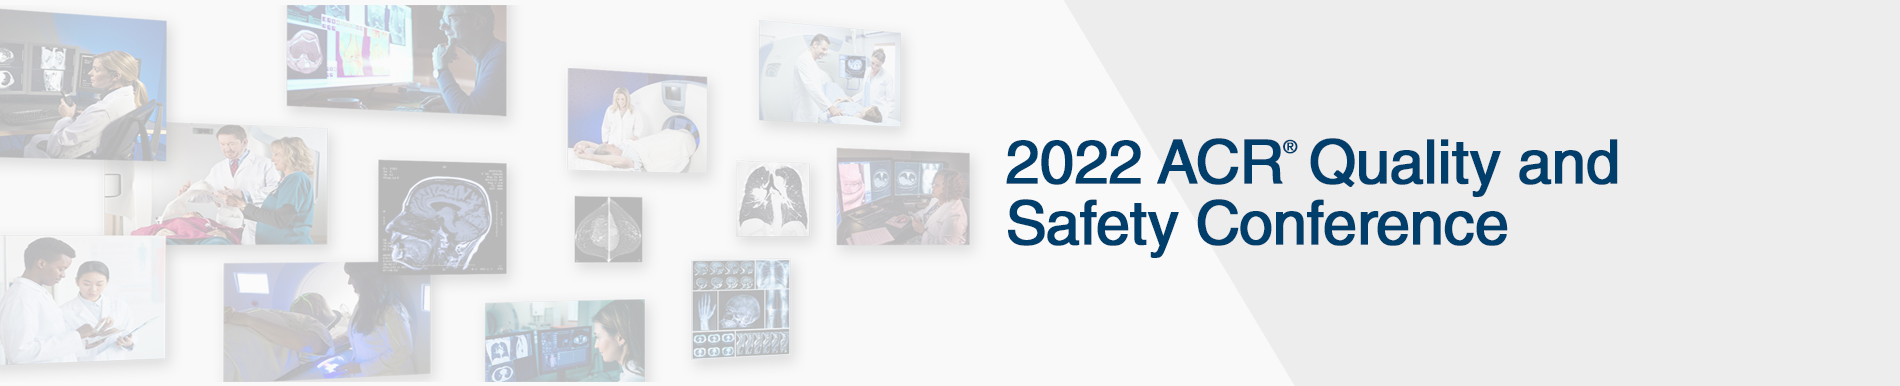 2022 ACR Quality and Safety Conference